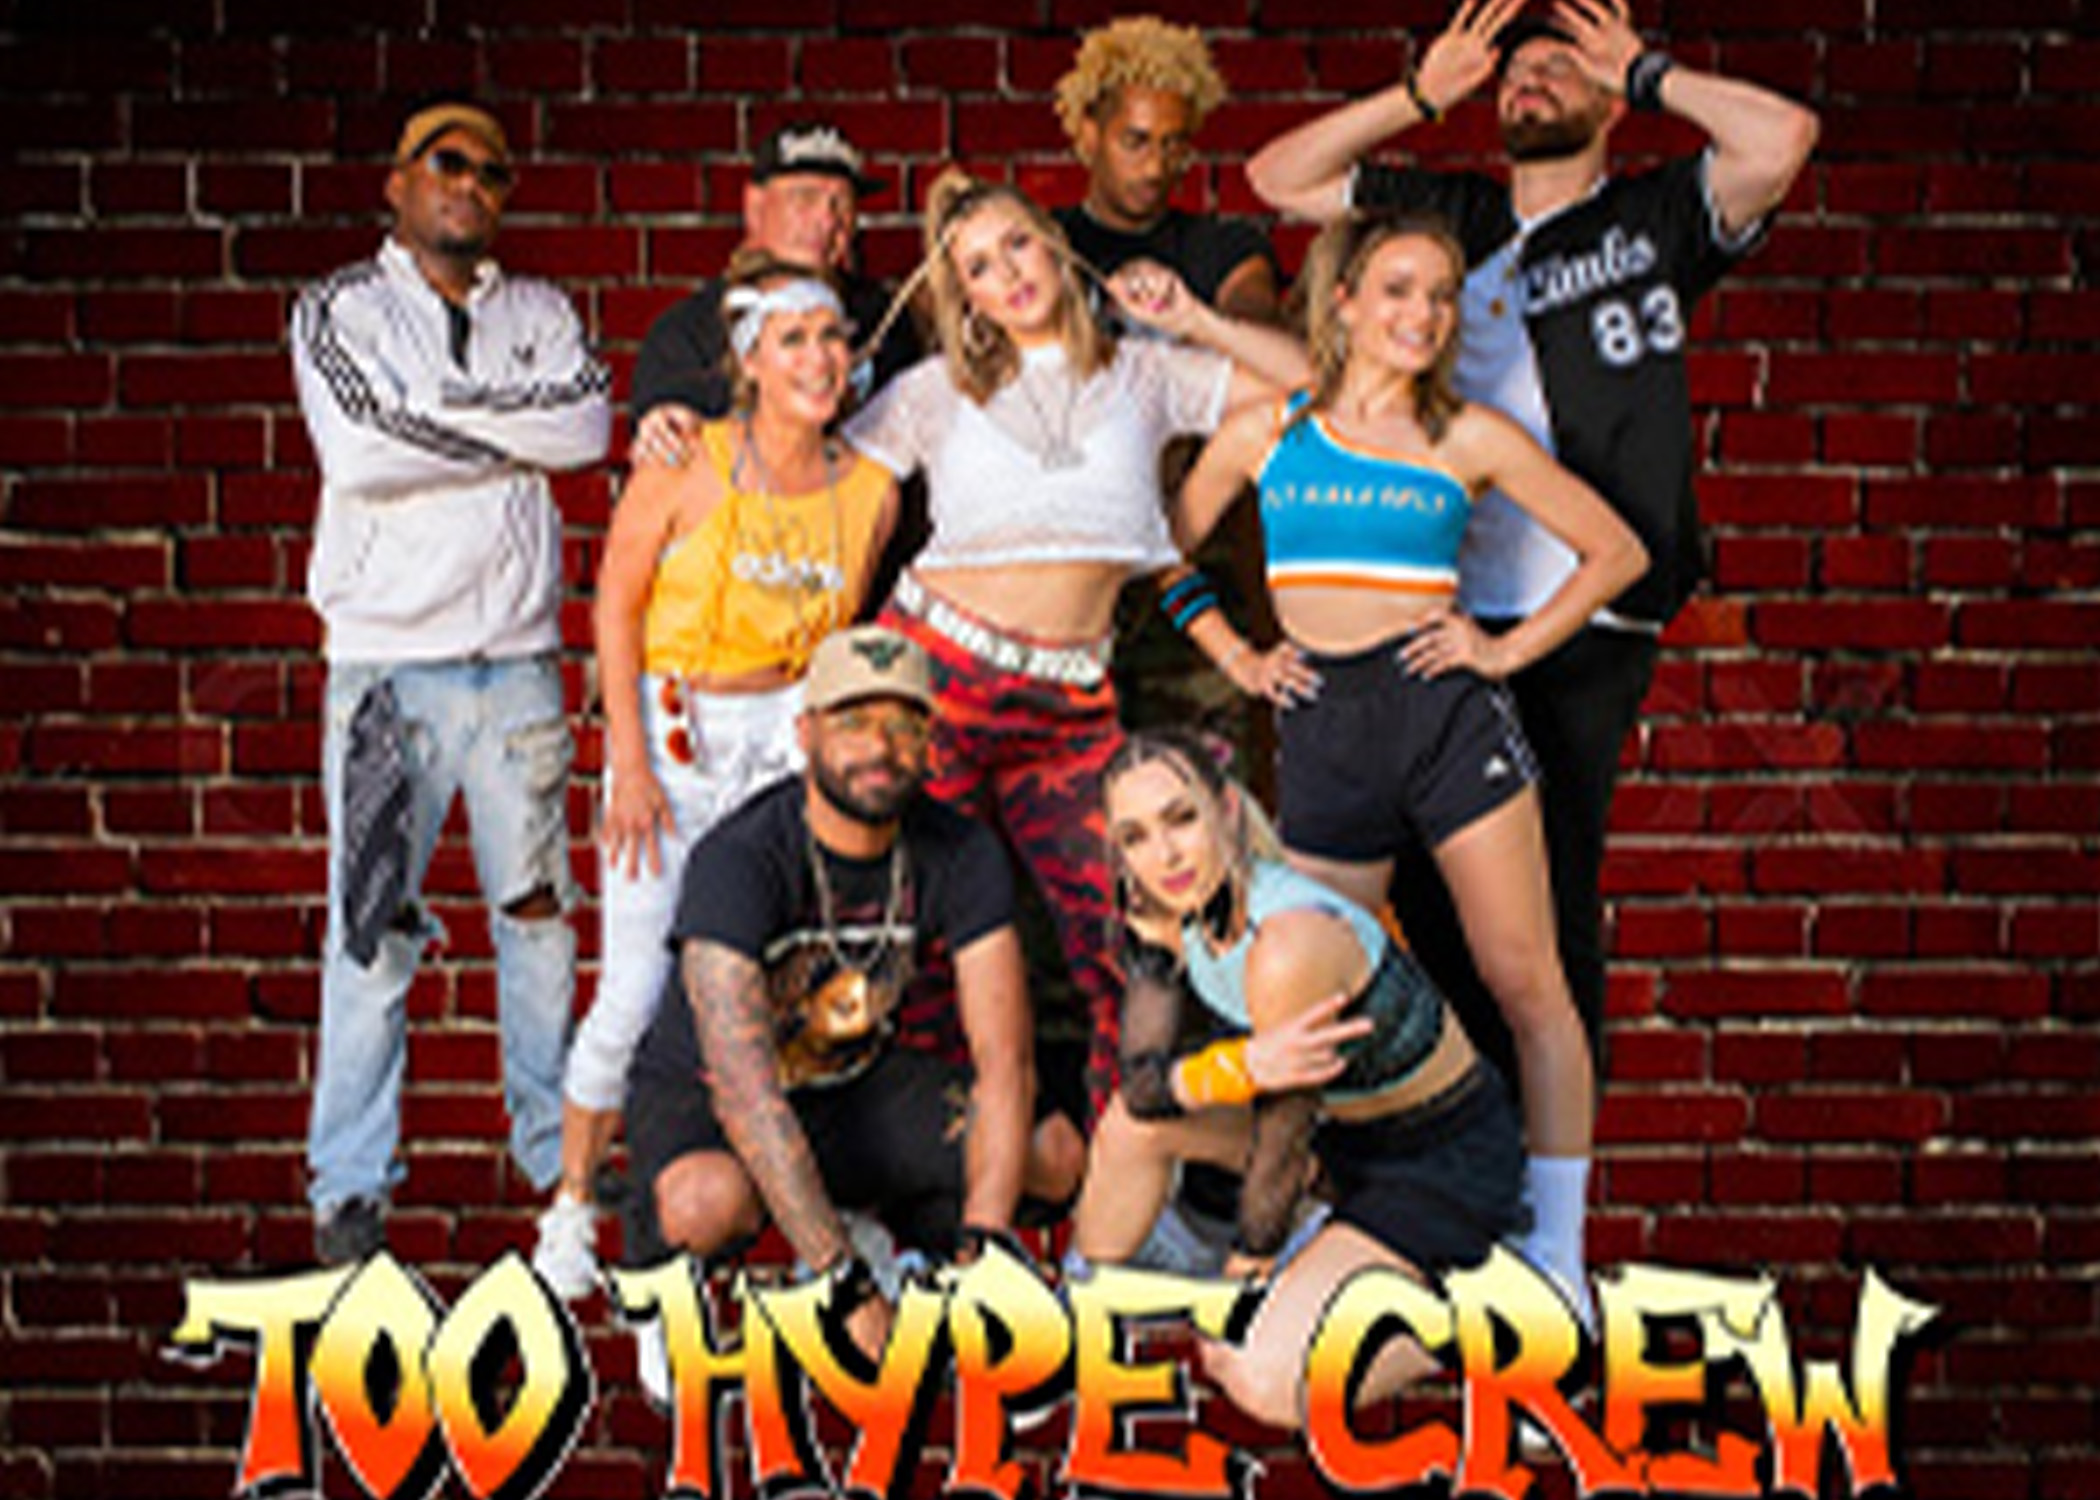 First Friday Concert Series: Too Hype Crew